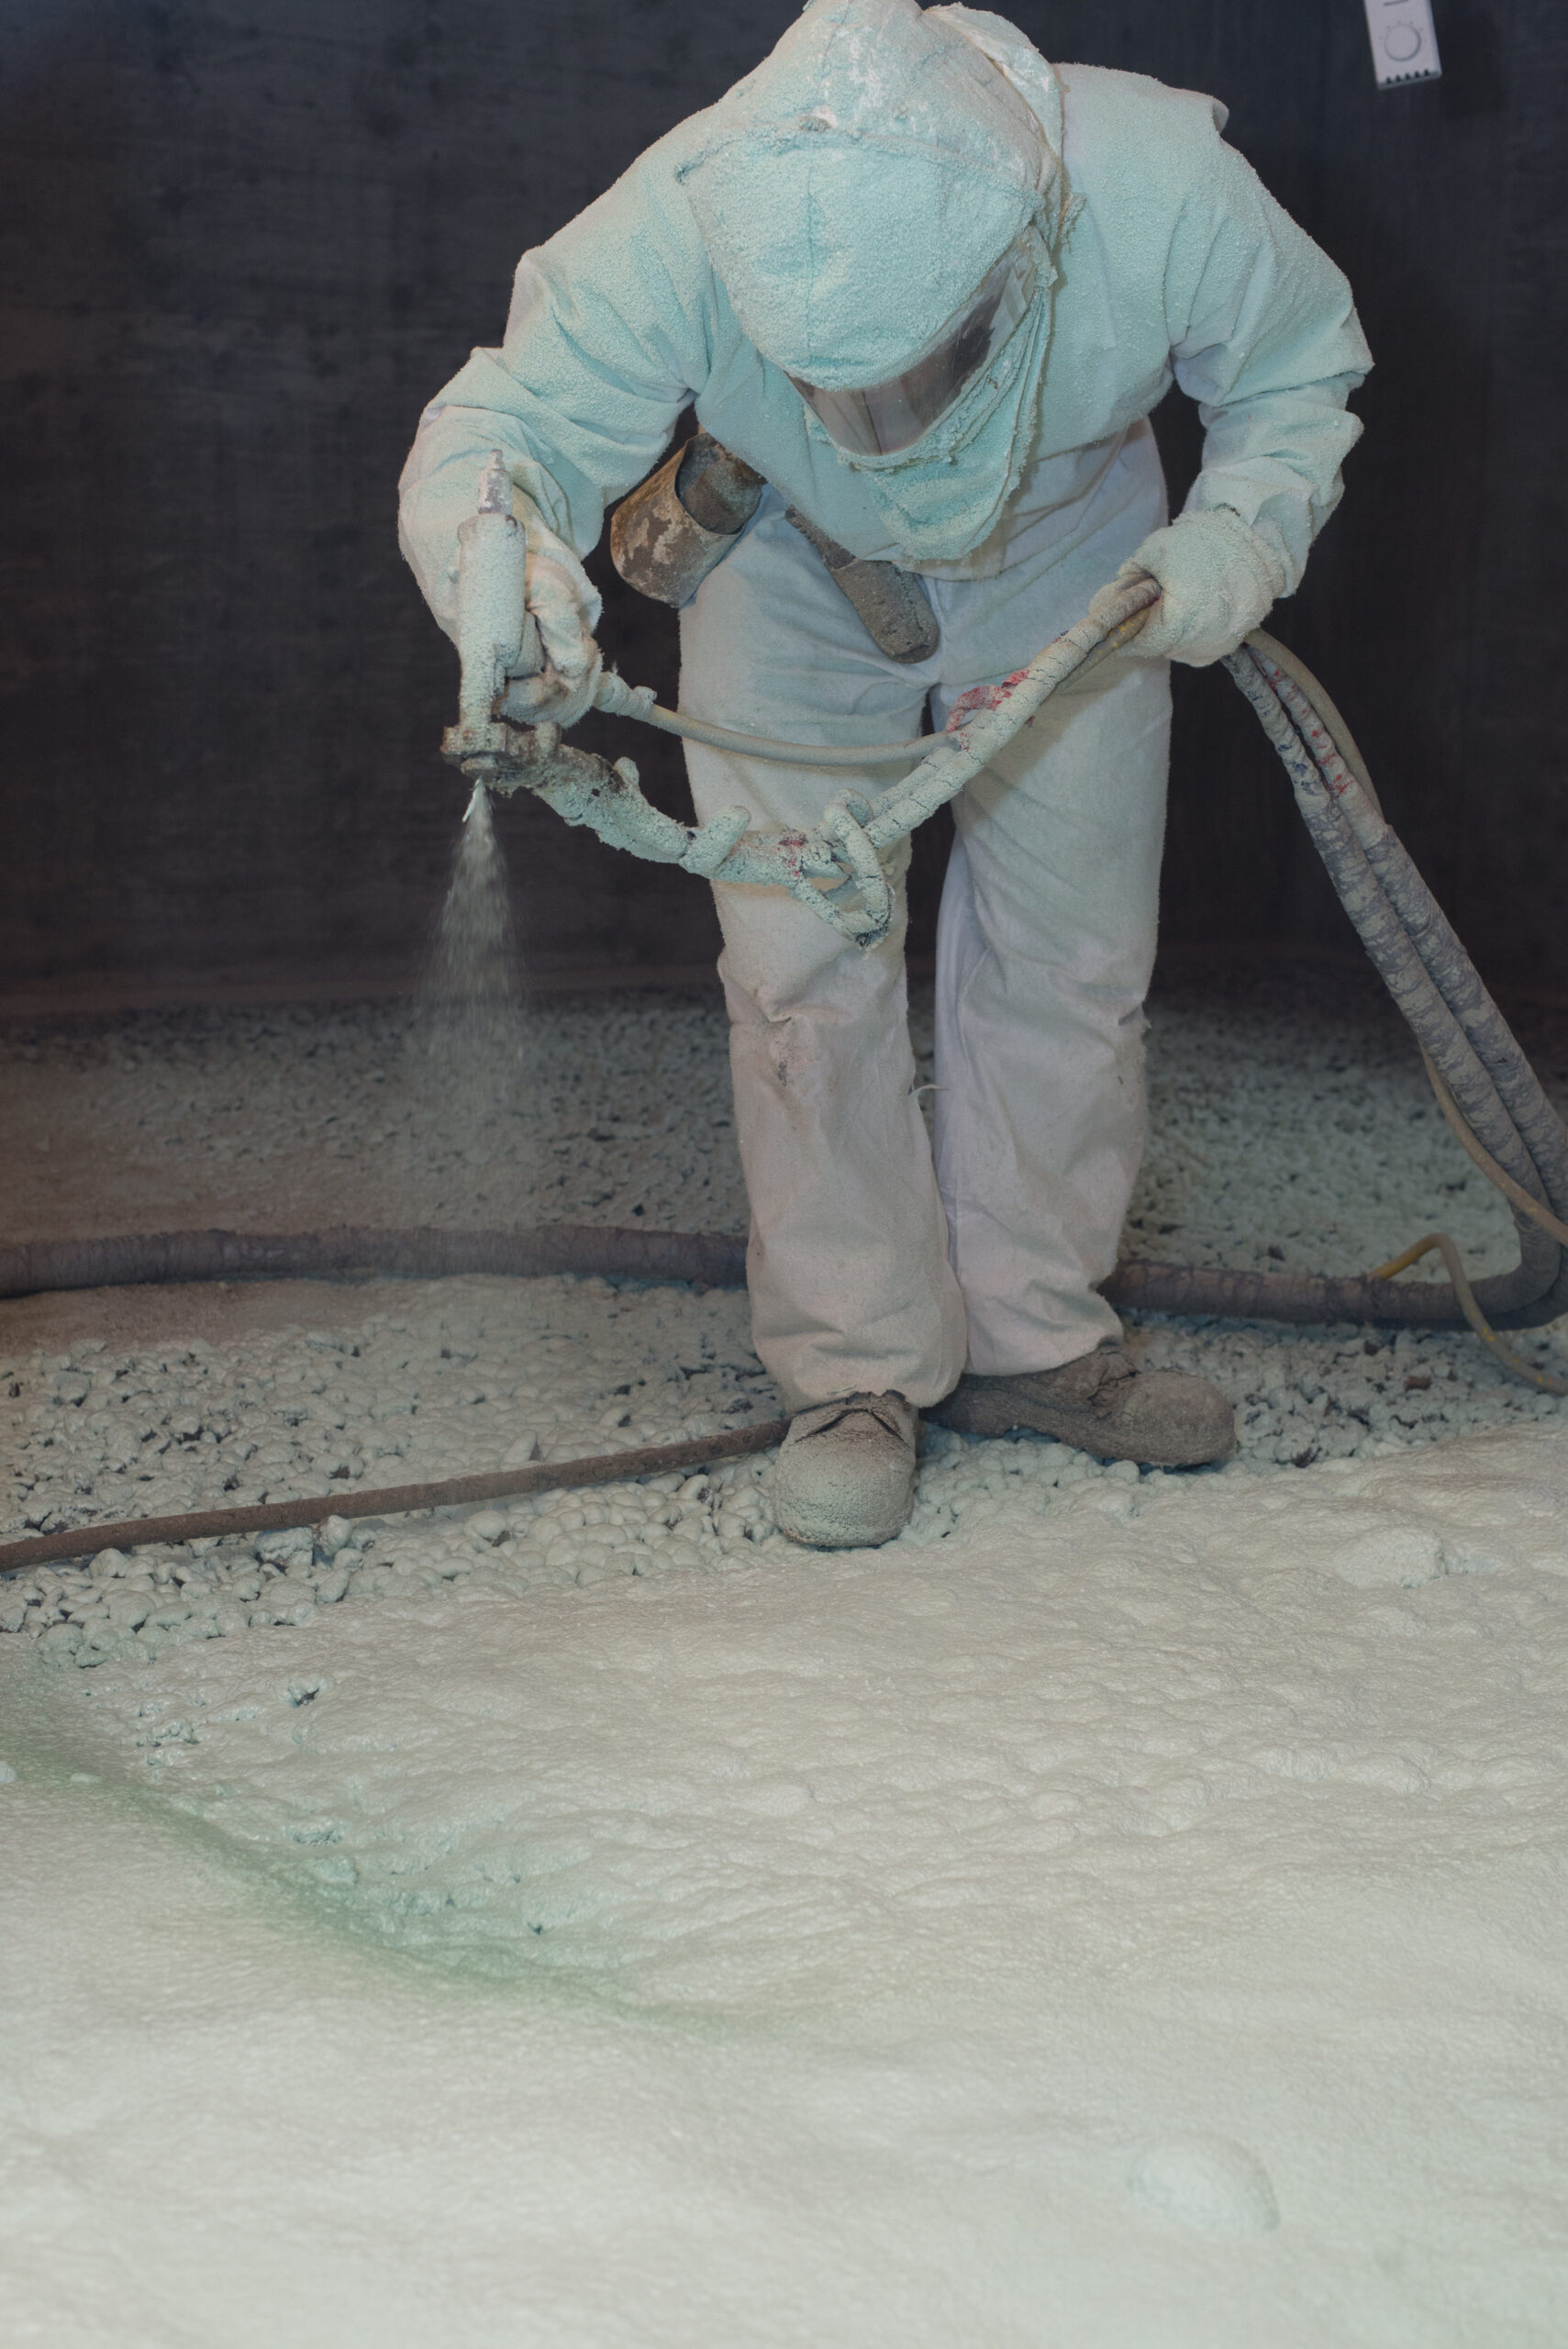 Worker in protective gear spraying insulation on a floor.